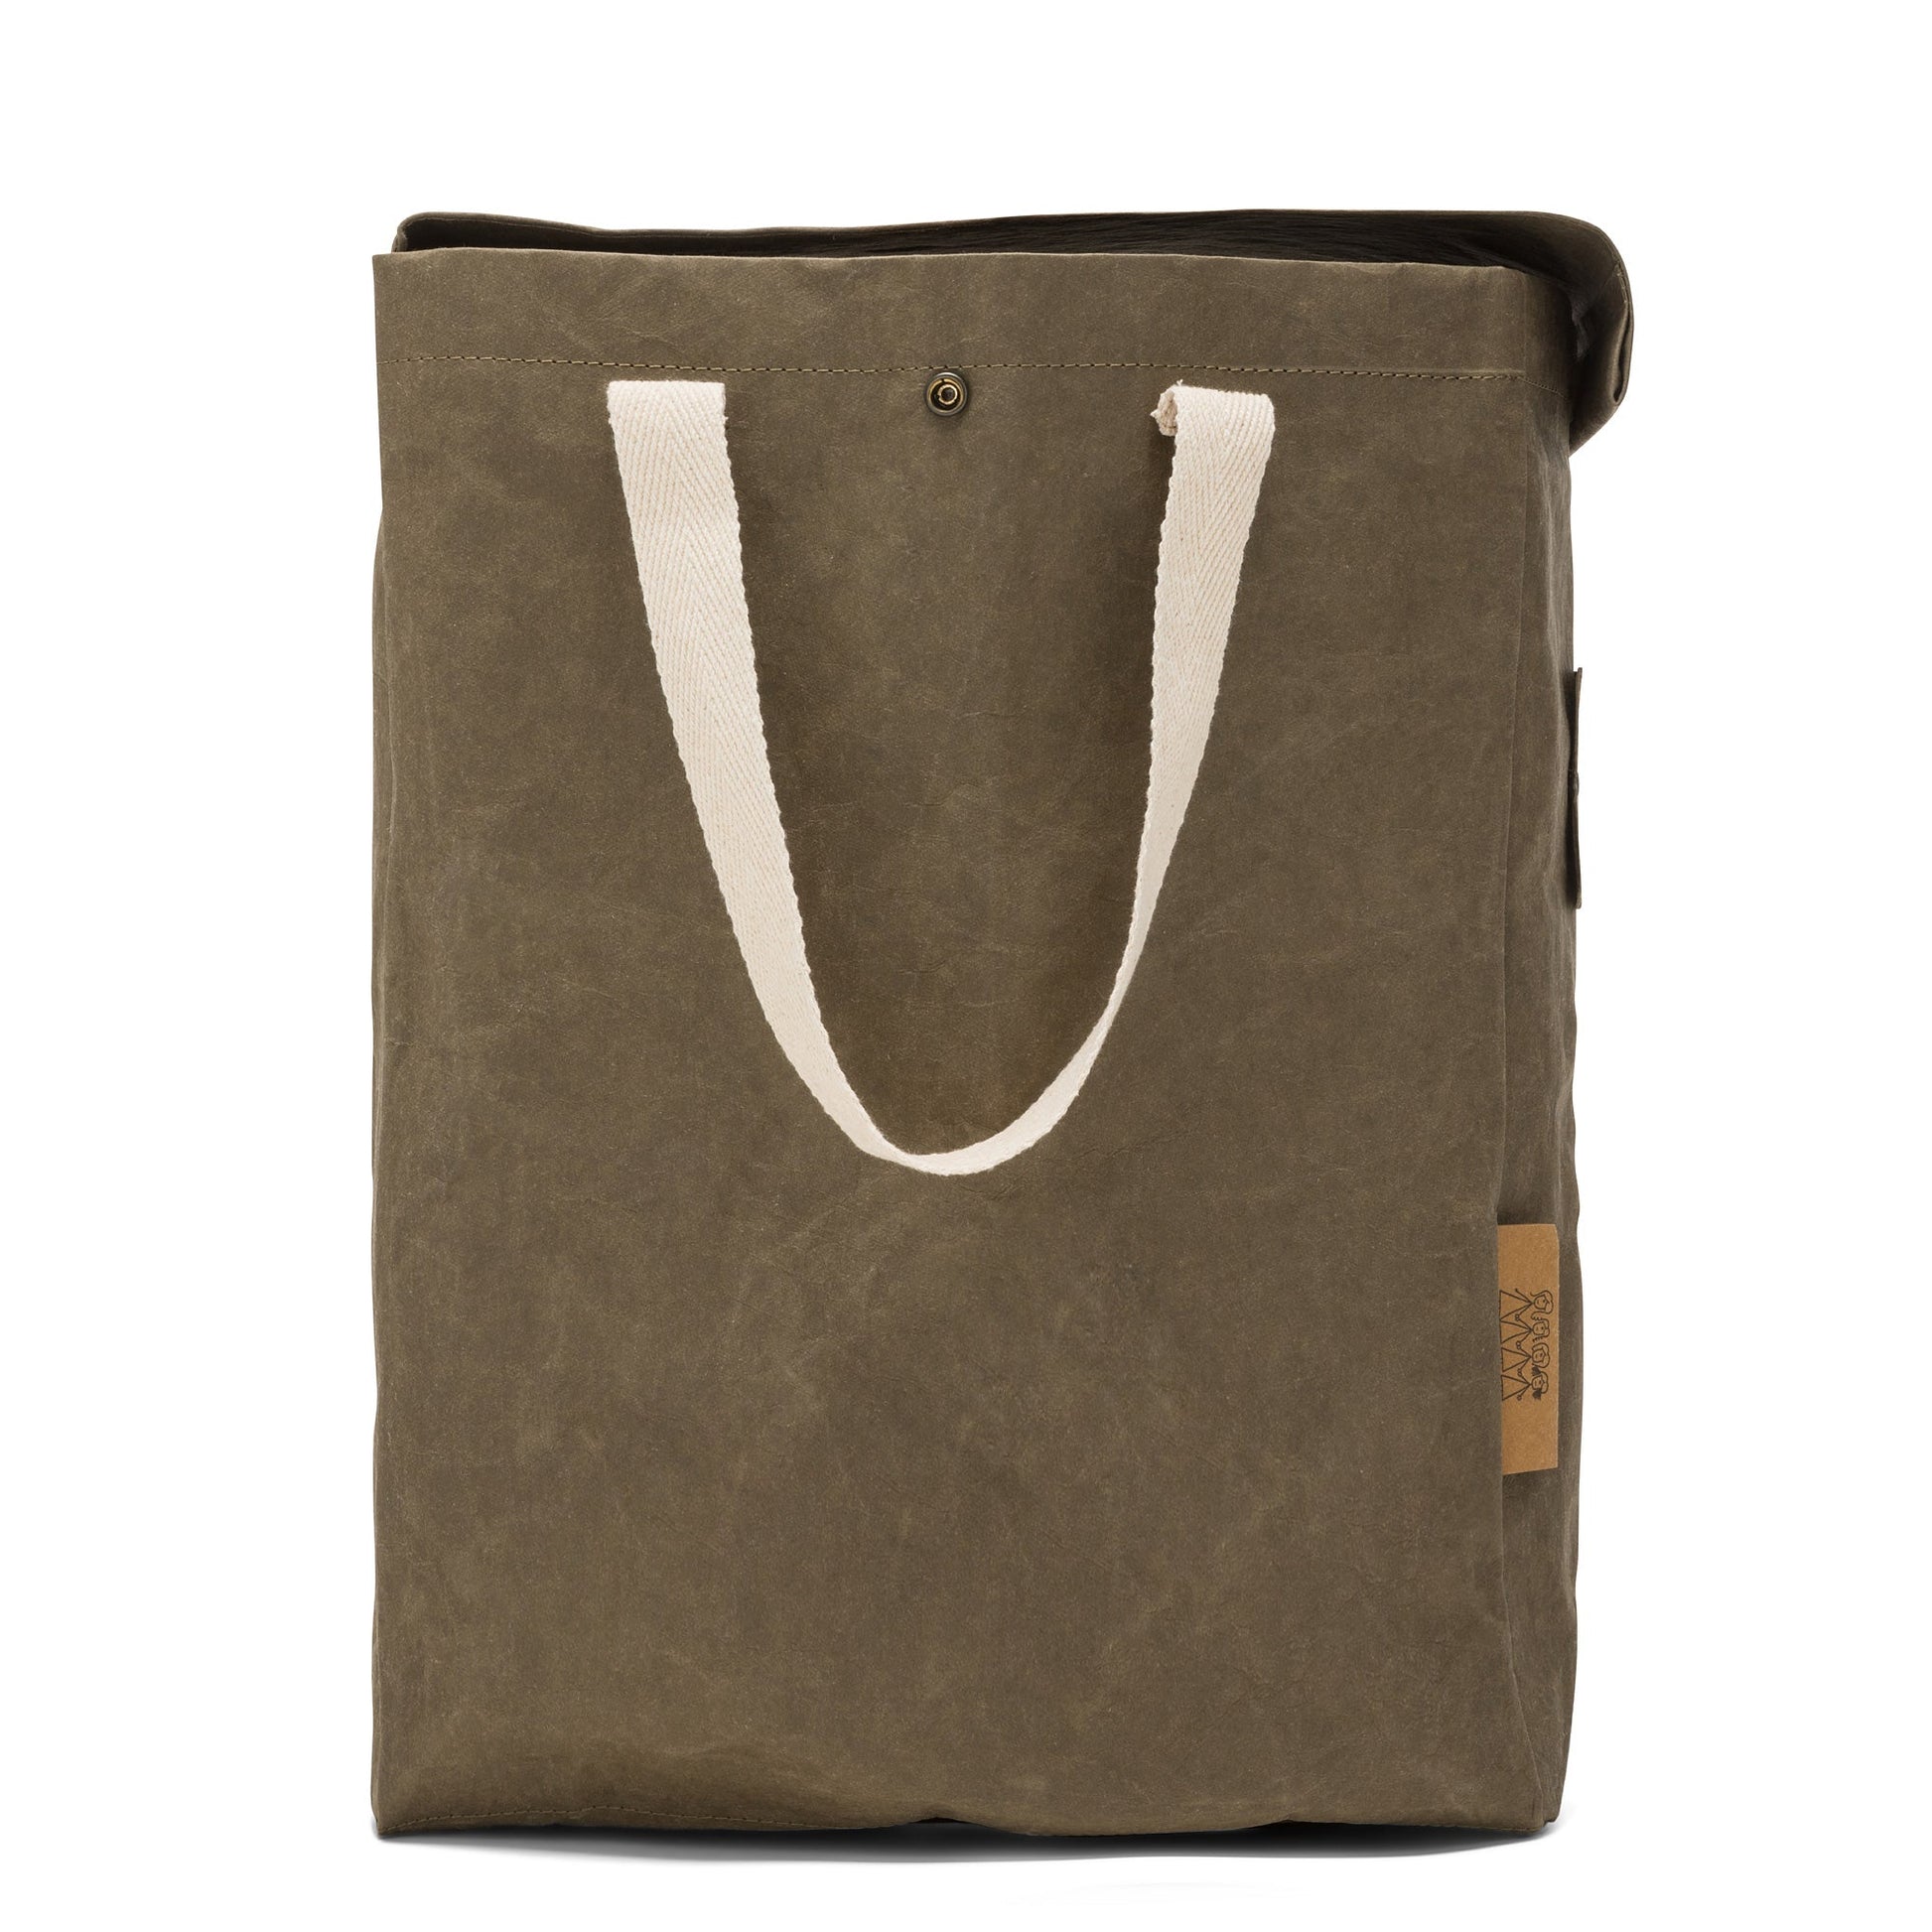 A washable paper recycling bag is shown from the side. The bag has a washable paper  lid which is attached, a washable paper tag attached to the front by two metal studs, and two recycled cotton straps - one on each side. There is a metal stud on the side at the top to attach to another washable paper recycling bag. The bag shown is olive.